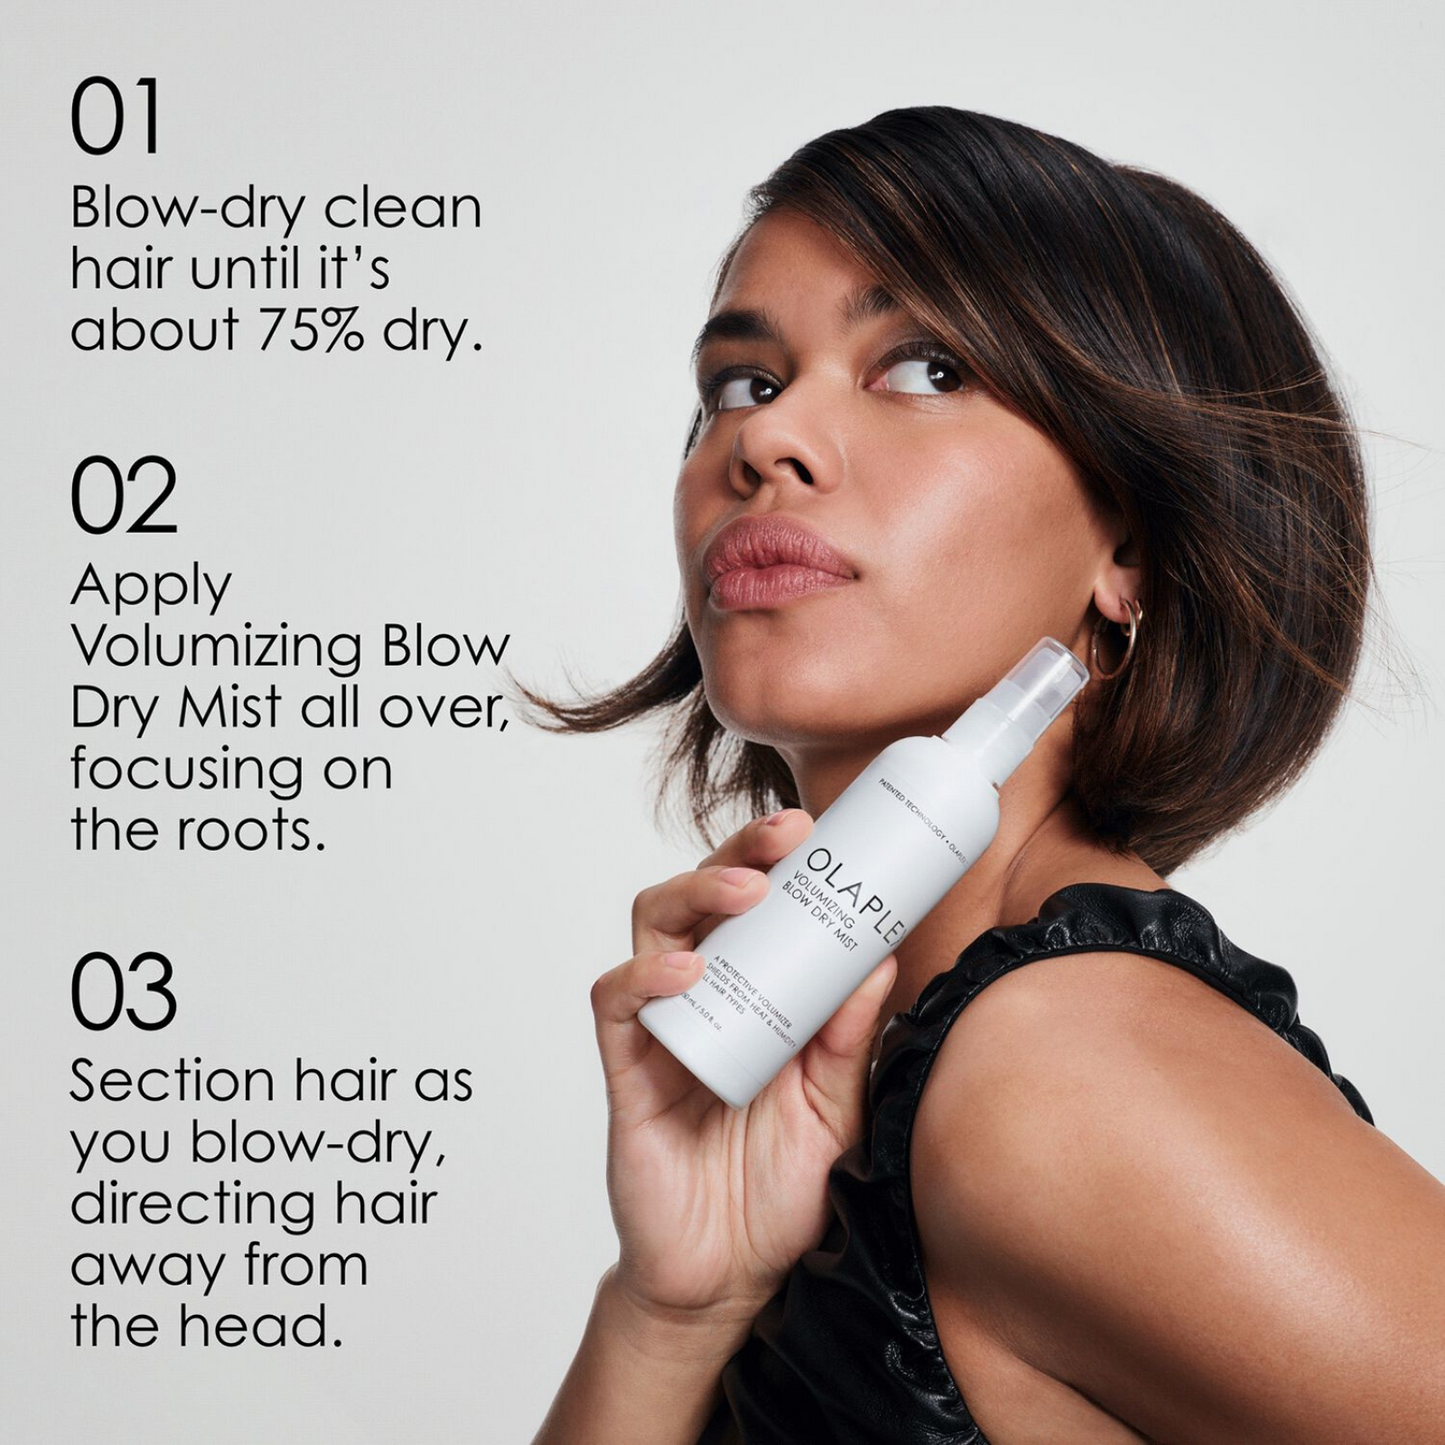 For heat protection: apply mist all over to clean, damp hair and blow-dry to about 75% dry. For added lift, apply Volumizing Blow Dry Mist again, focusing on roots. Section hair as you blow-dry. For more body and bounce, direct hair away from the head or use a round brush to lift roots as you blow-dry. To refresh 2nd day hair, apply to dry hair, focusing on the roots and repeat step 2.